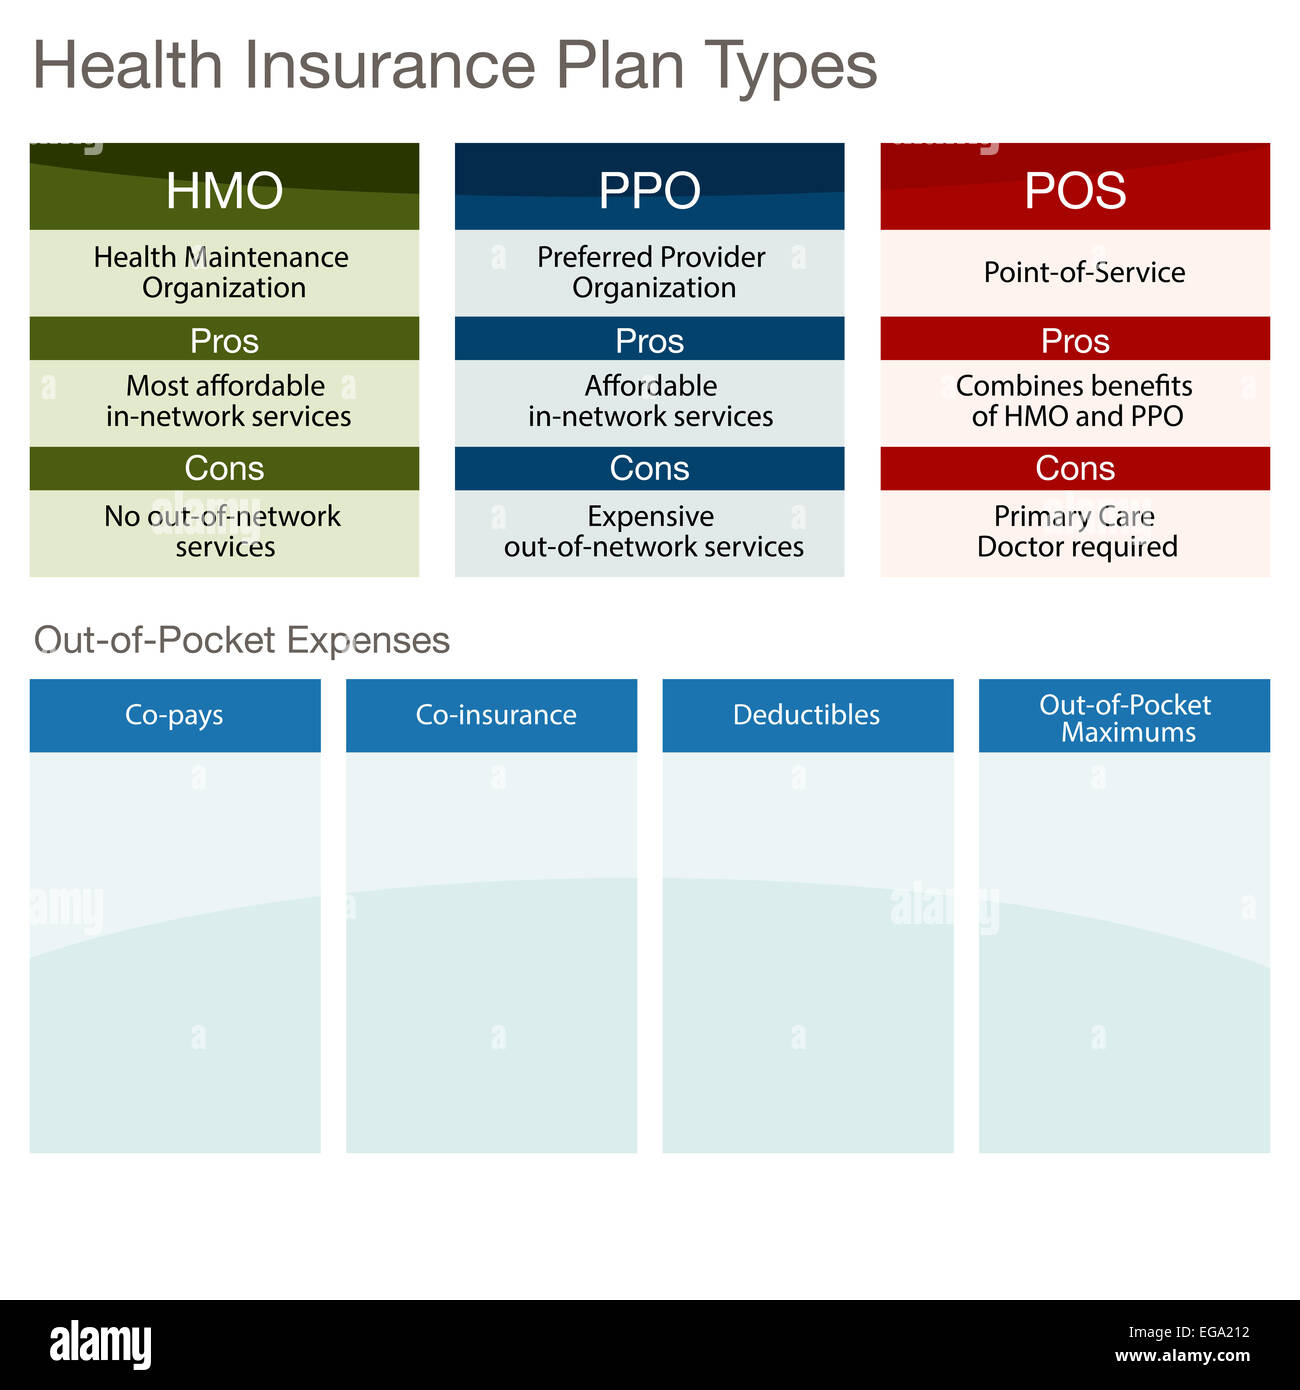 Fully-Funded vsSelf-Funded Group Health Plans Comparison